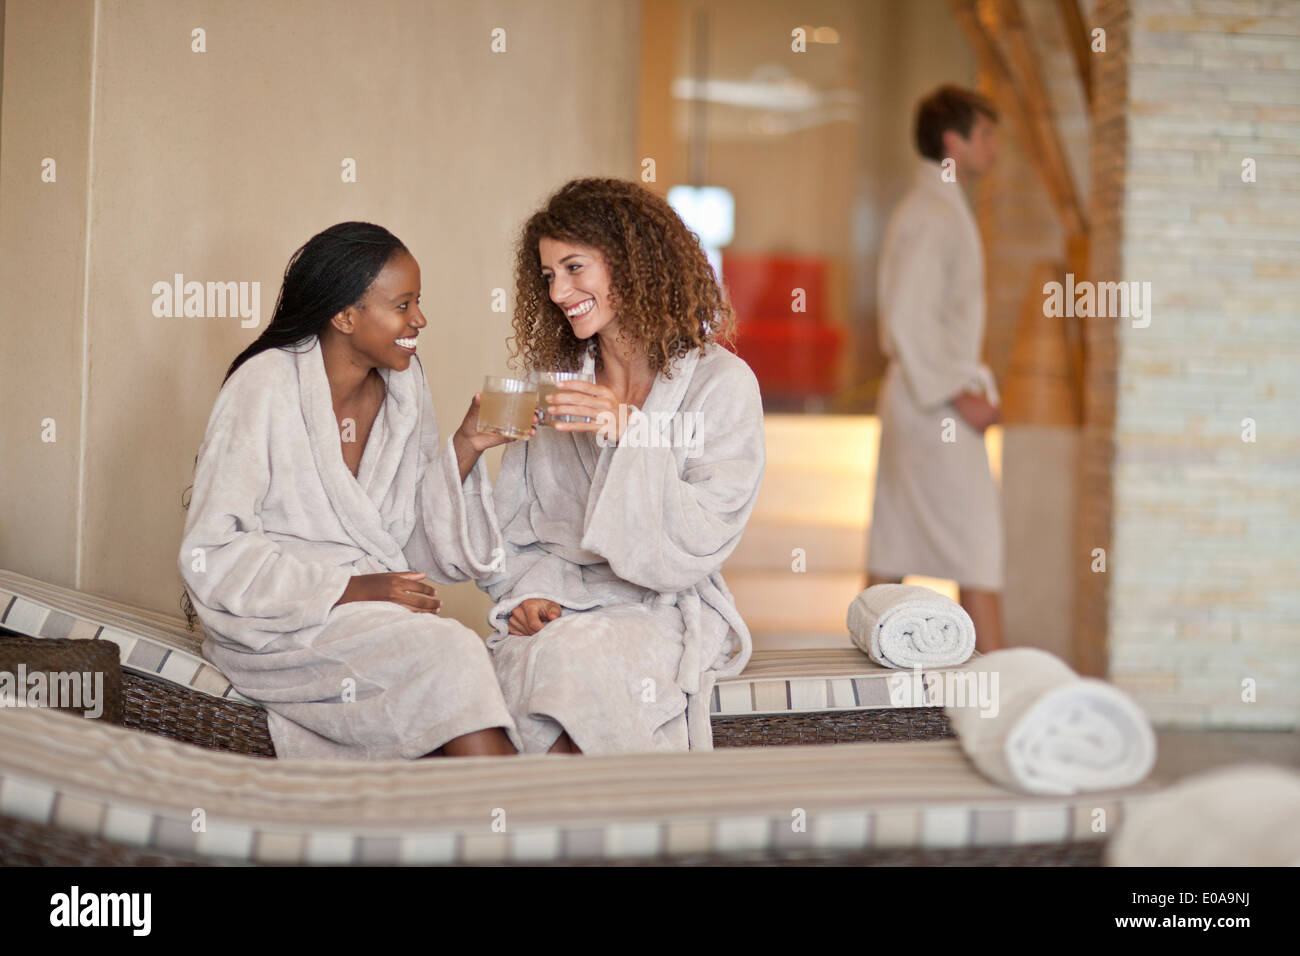 Two young women chatting on loungers in spa Stock Photo